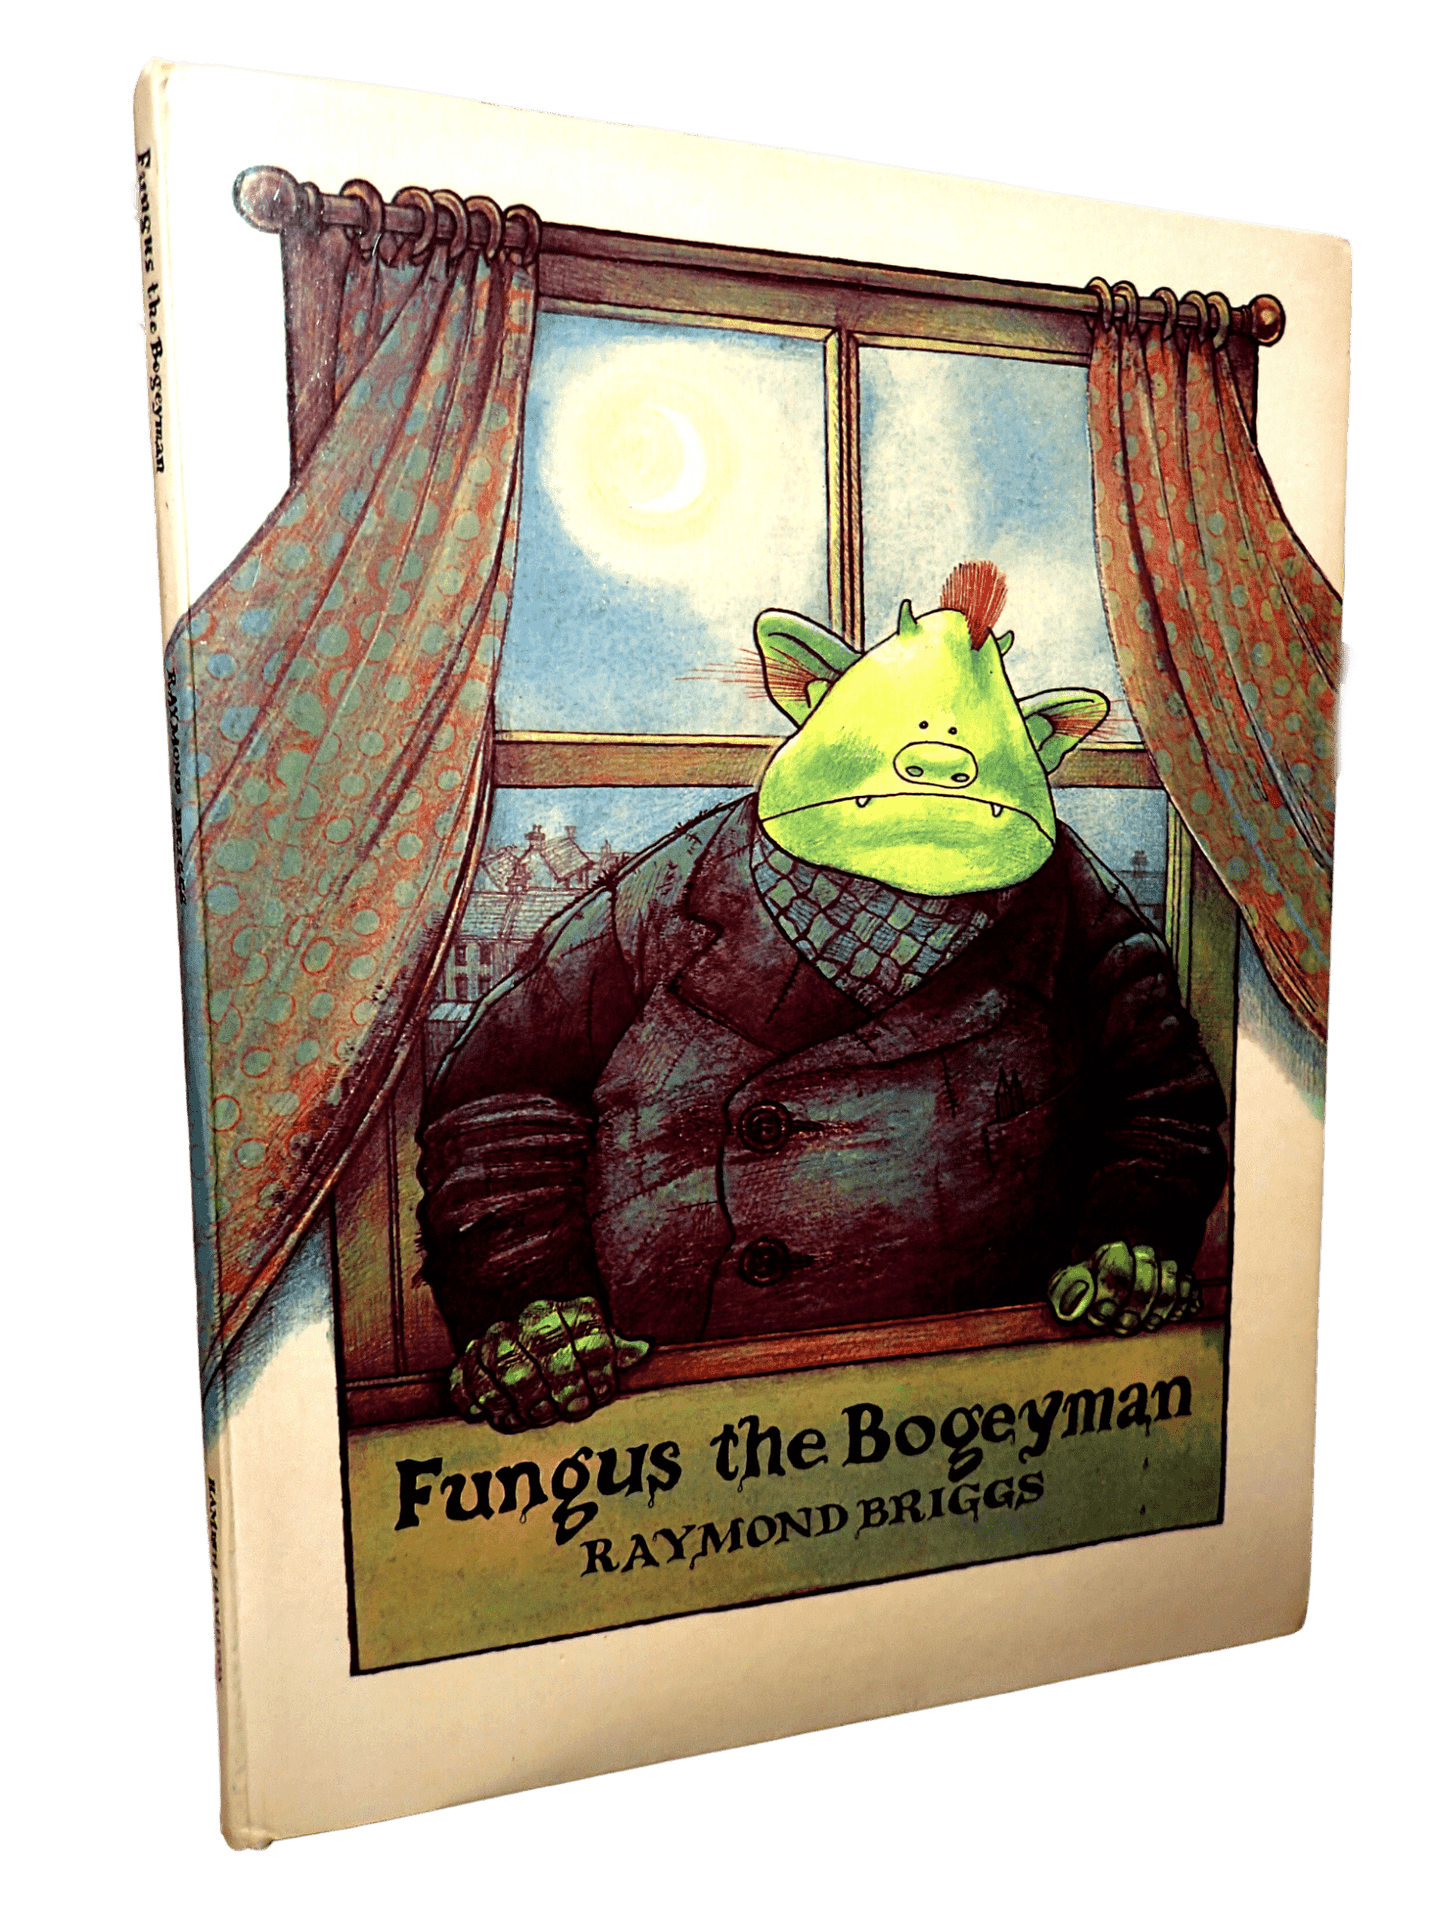 Fungus The Bogeyman Raymond Briggs First Edition Front Cover of Fungus The Bogeyman Raymond Briggs  Vintage Children's Book by Snowman Author showing Fungus looking out of a window. 